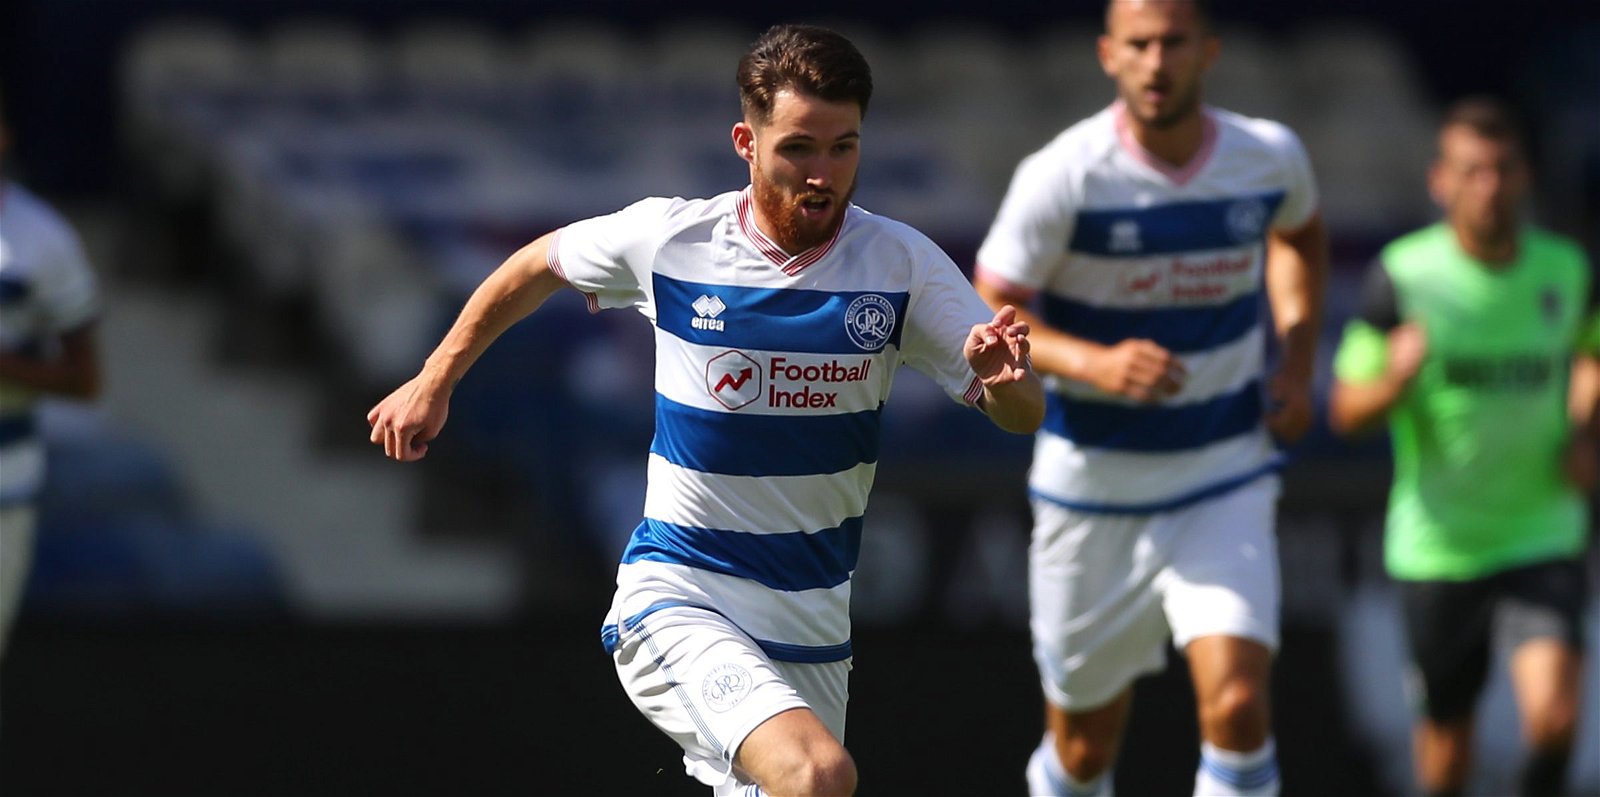 Hull City QPR Paul Smyth, Comment: Hull City should throw Paul Smyth Championship lifeline after QPR release